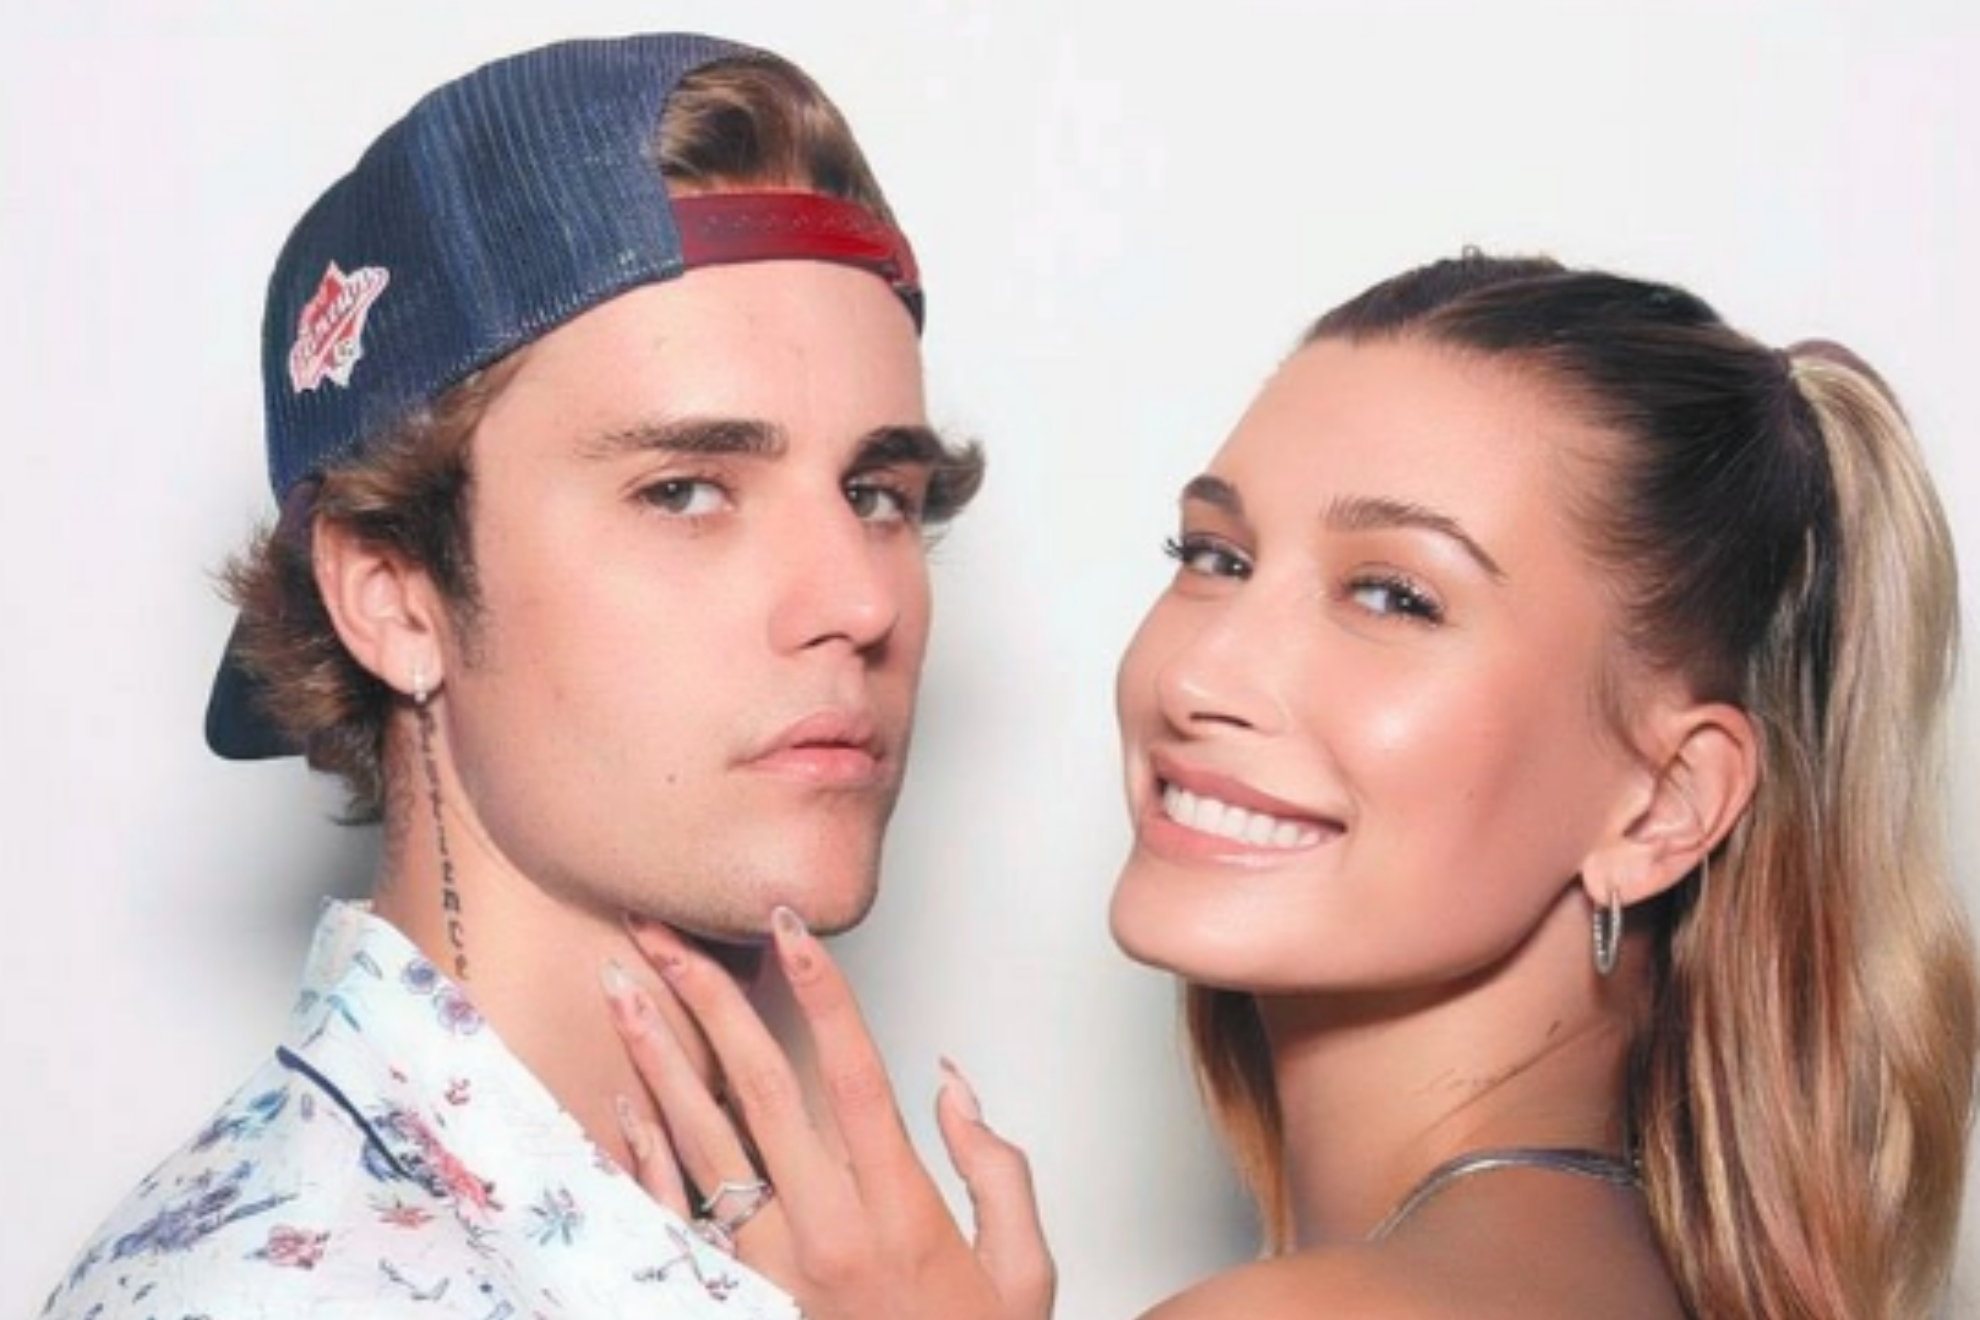 Justin Bieber interviews his entrepreneurial wife Hailey Bieber and tells all about her vision